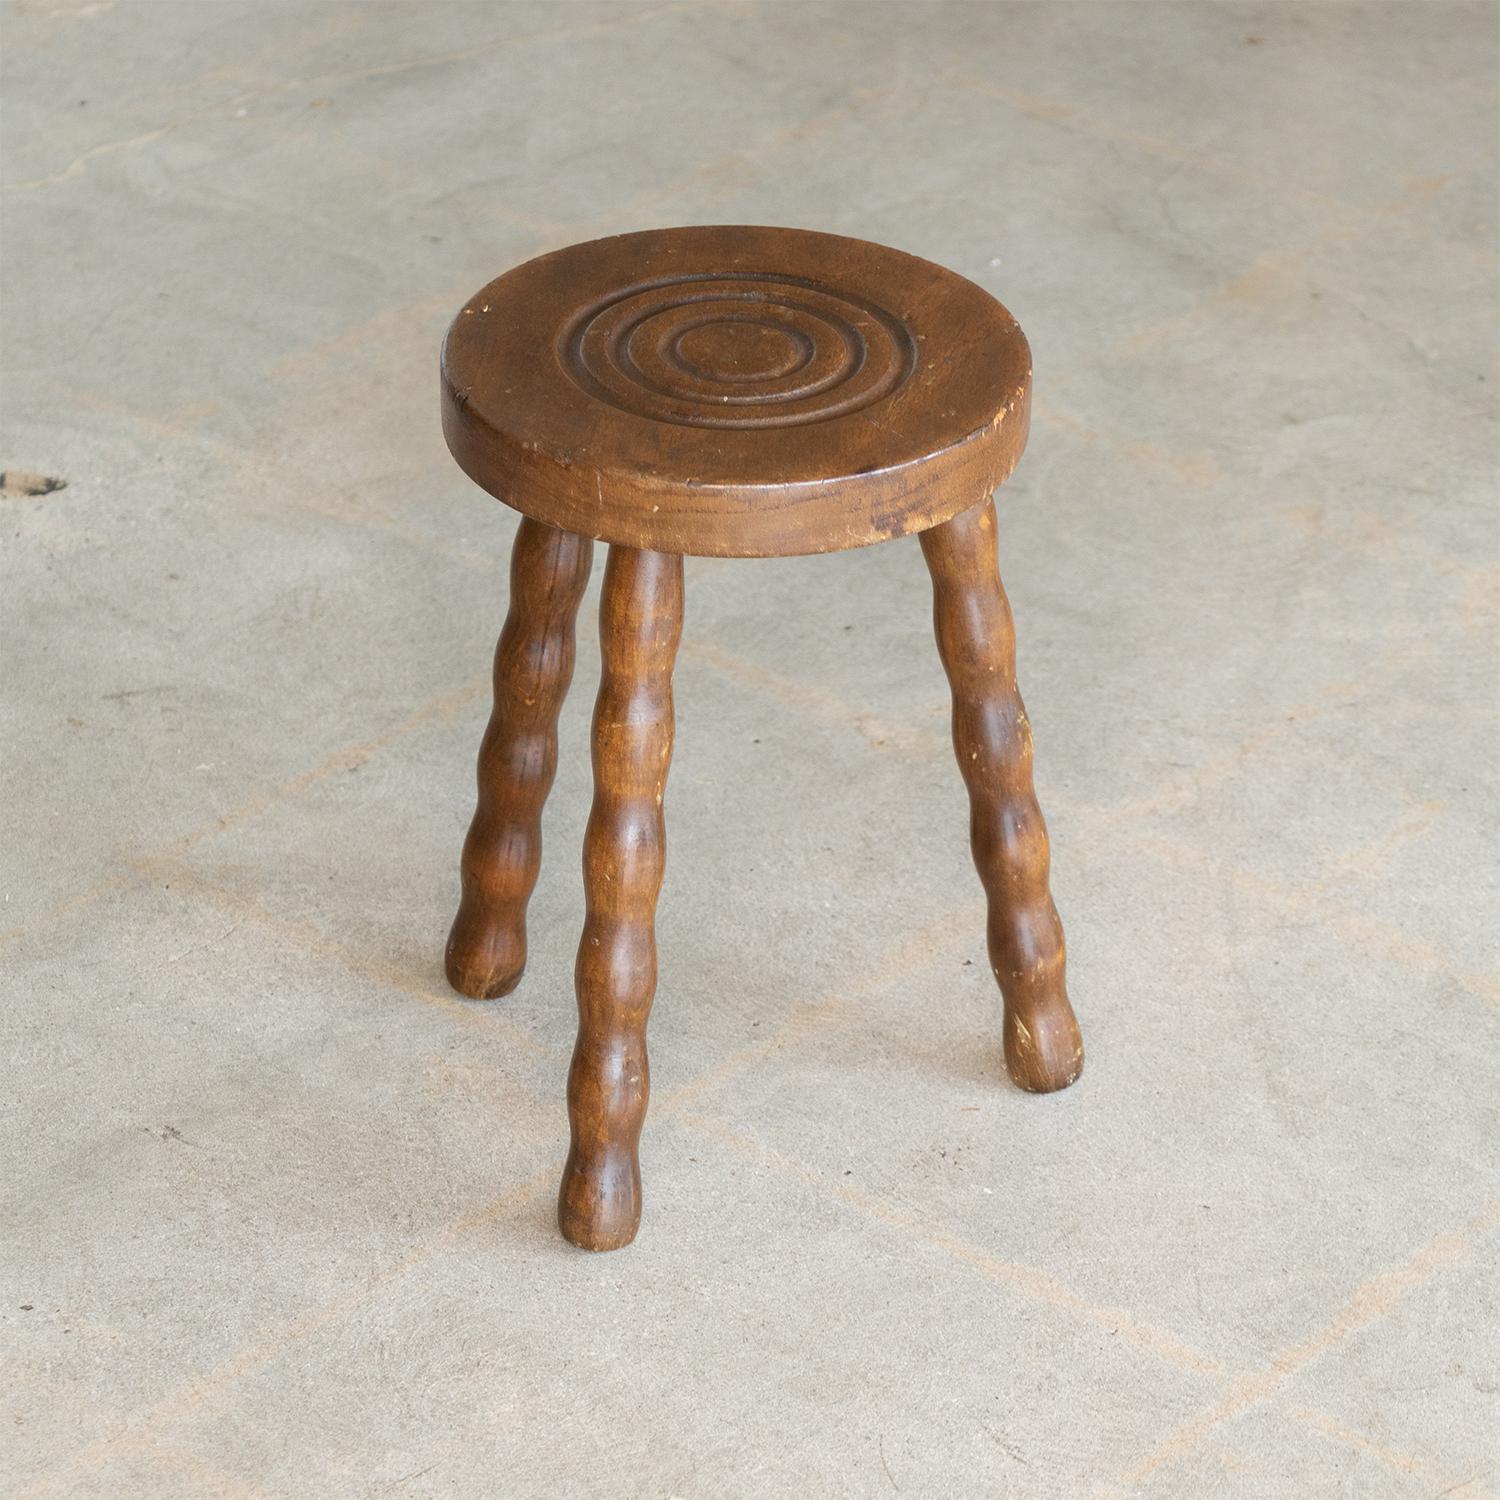 Great vintage wood tripod stool from France, 1950s. Circular top with carved ring detail and three wavy wood leg base. Original condition shows signs of wear, age, and knicks in wood. Perfect as small table next to chair or bathtub.



.